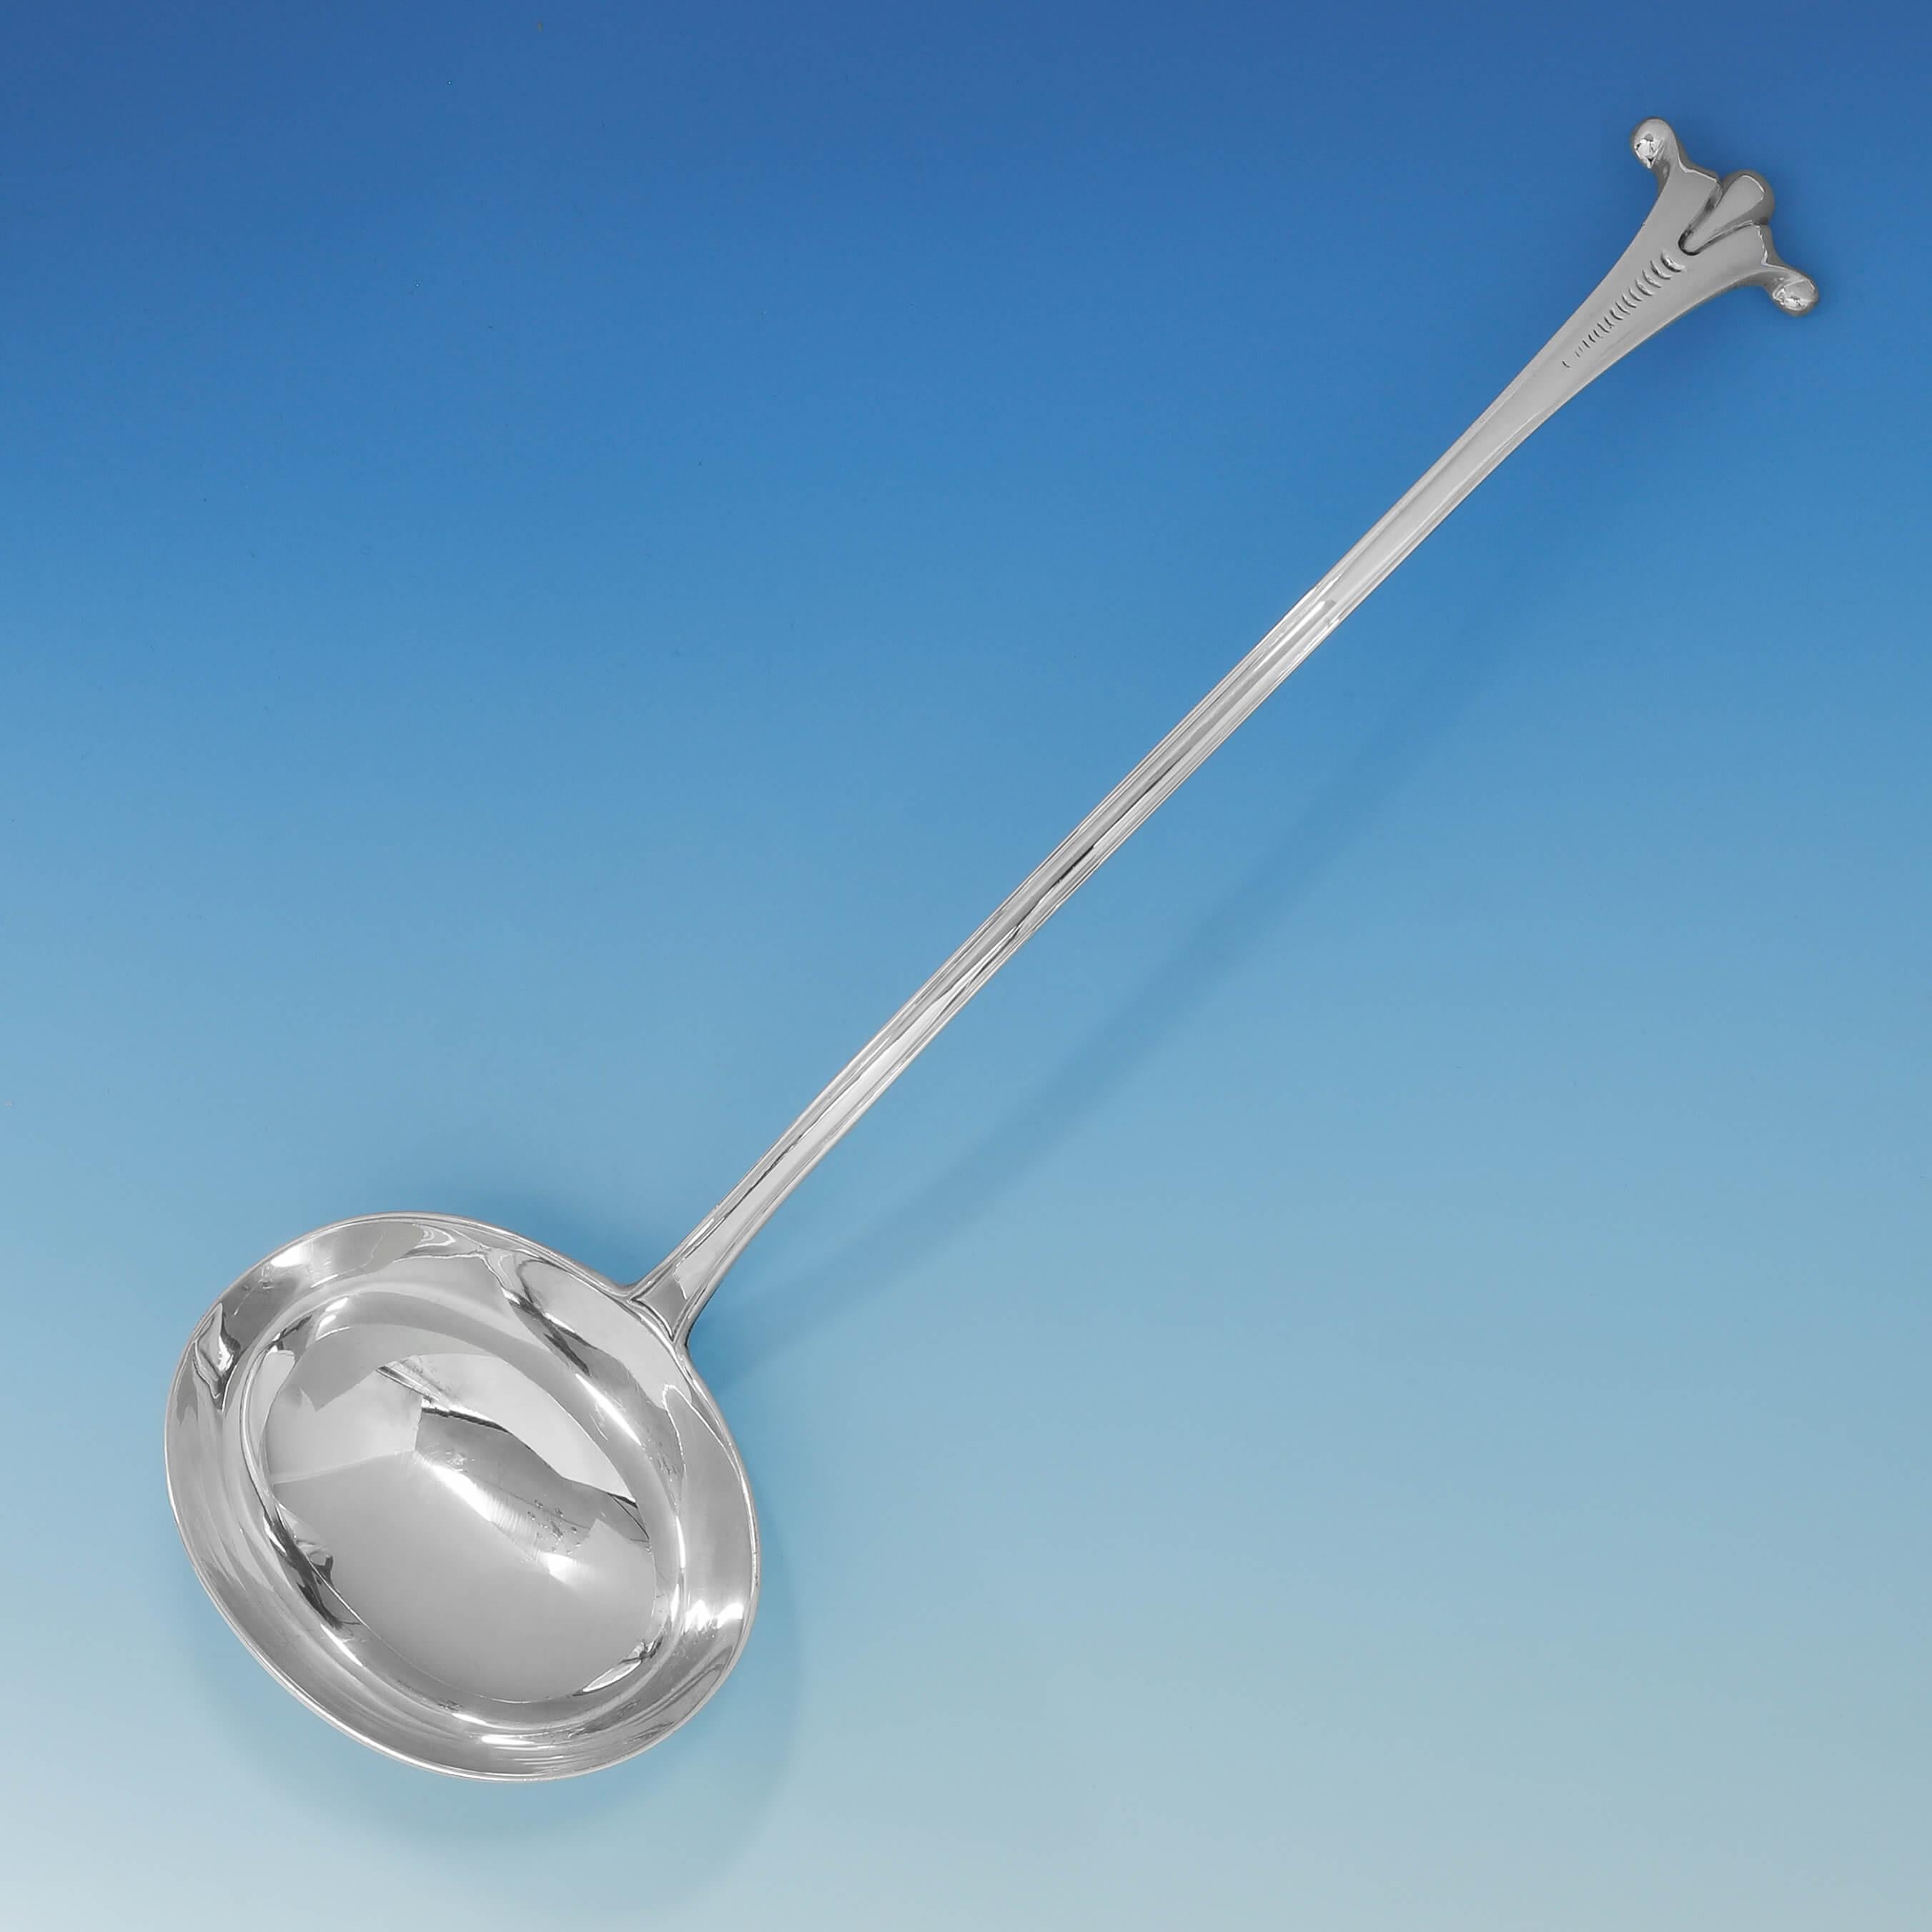 Hallmarked in London in 1854 by George Adams, this stylish, Victorian, antique sterling silver soup ladle, is in 'Onslow' pattern. The soup ladle measures 13.5